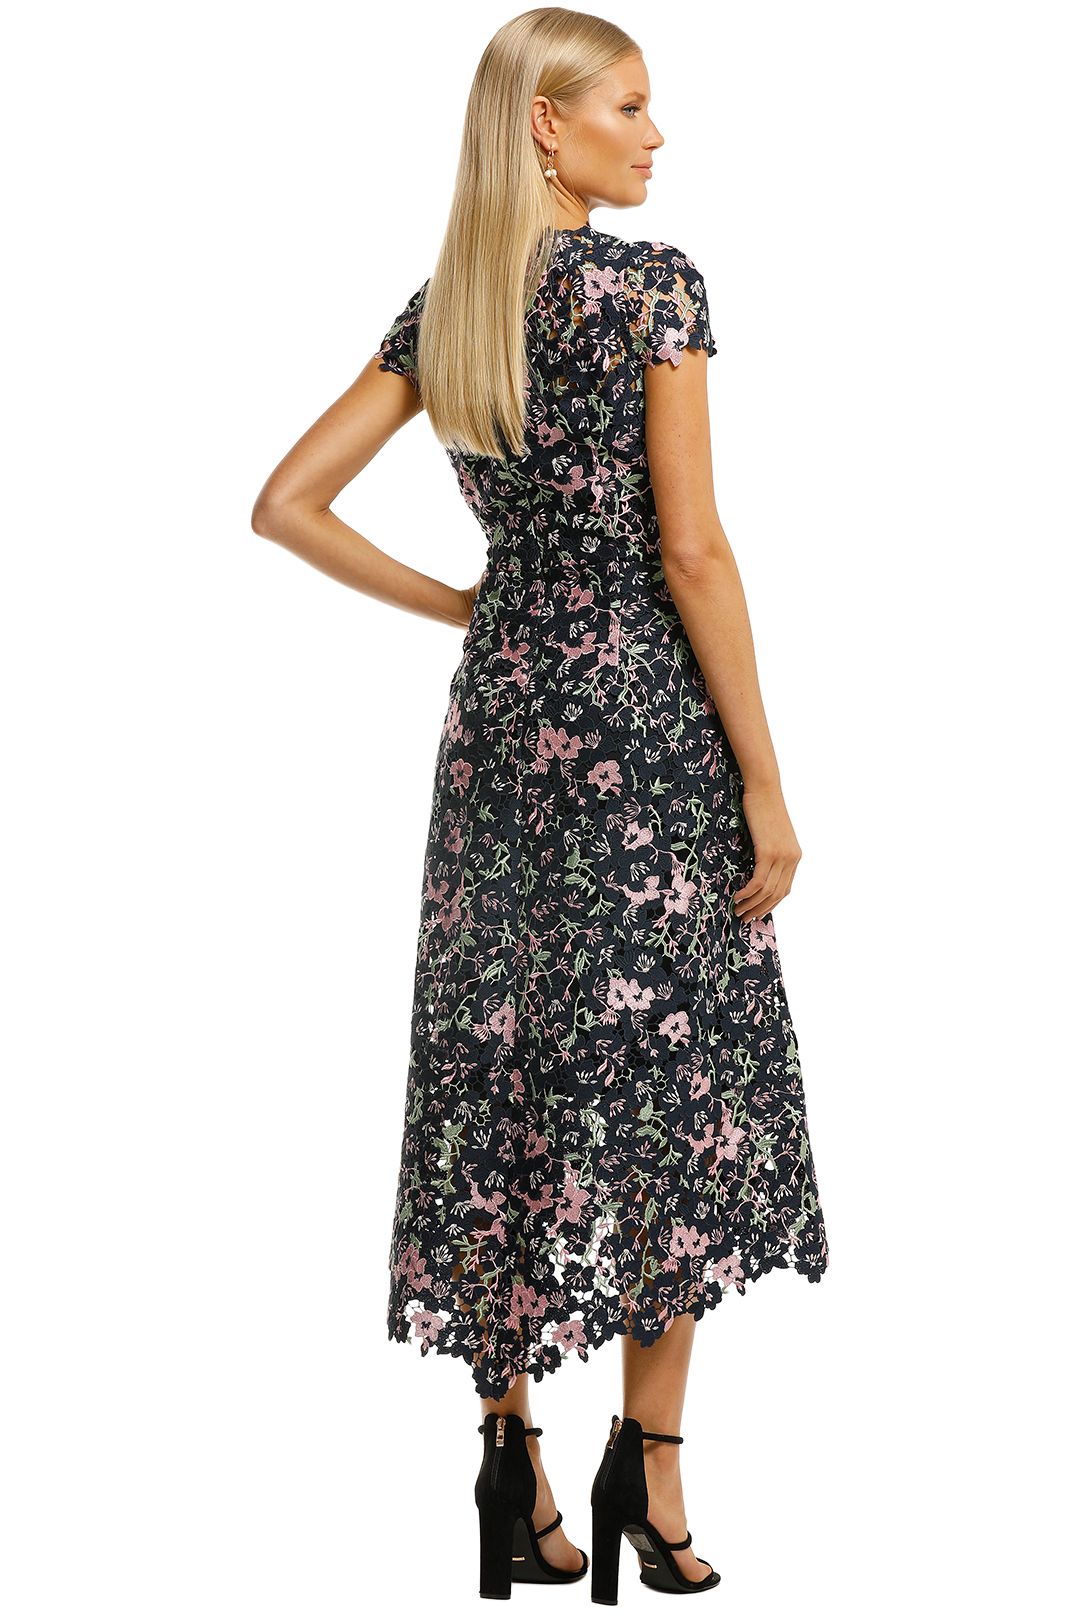 Birdy Dress in Floral by Moss and Spy for Rent | GlamCorner